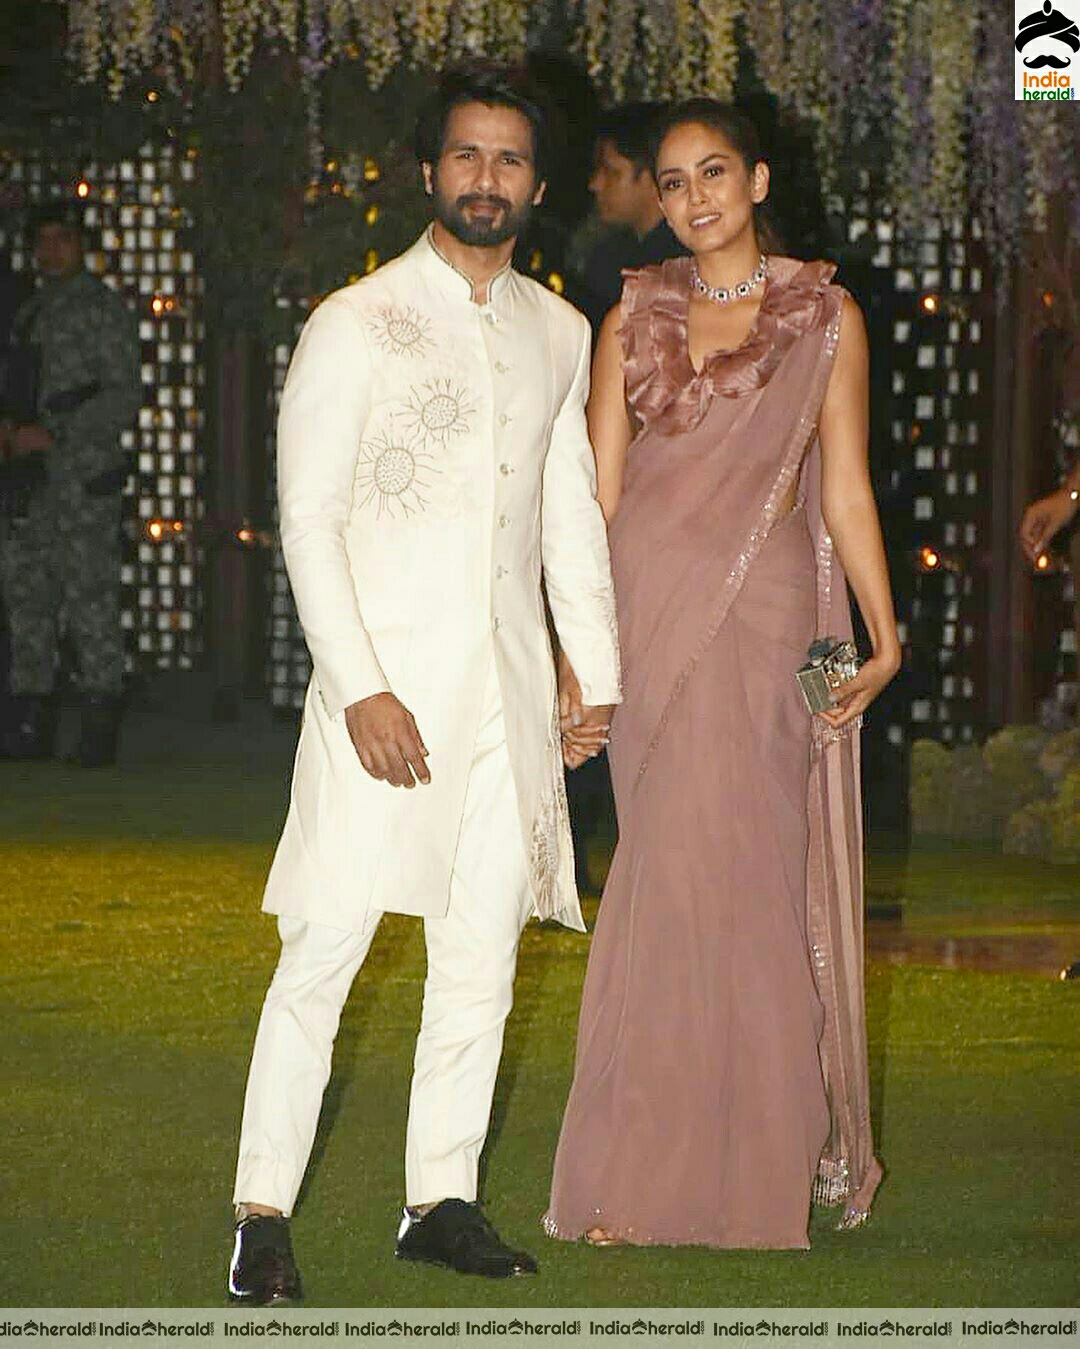 Shahid Kapoor spotted along with his wife Mira Rajput at a wedding in Mumbai